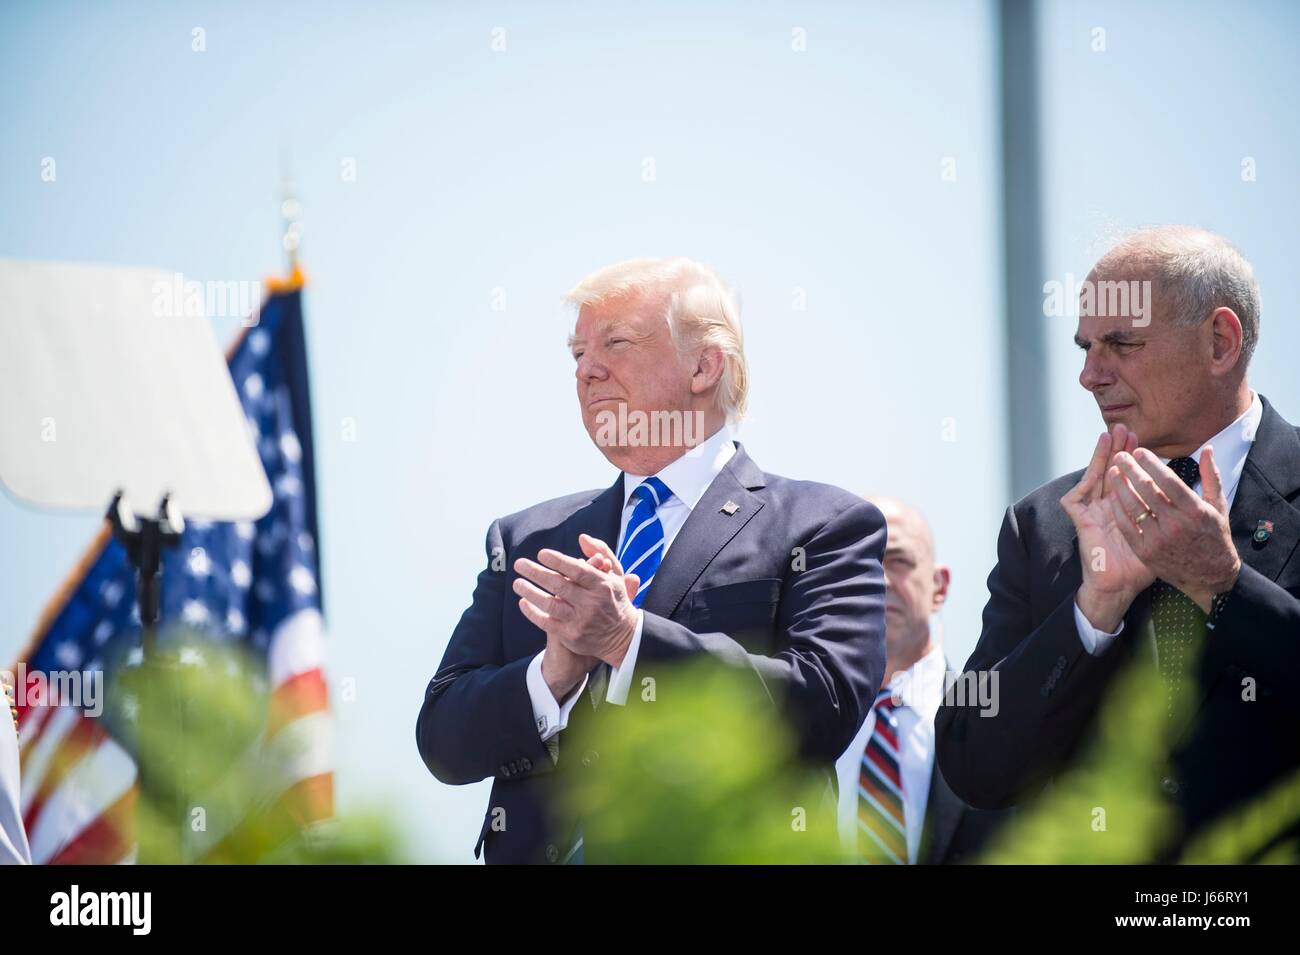 U.S. President Donald Trump and Homeland Security Secretary John Kelly applaud during the 136th Coast Guard Academy graduating class May 17, 2017 in New London, Connecticut. Stock Photo